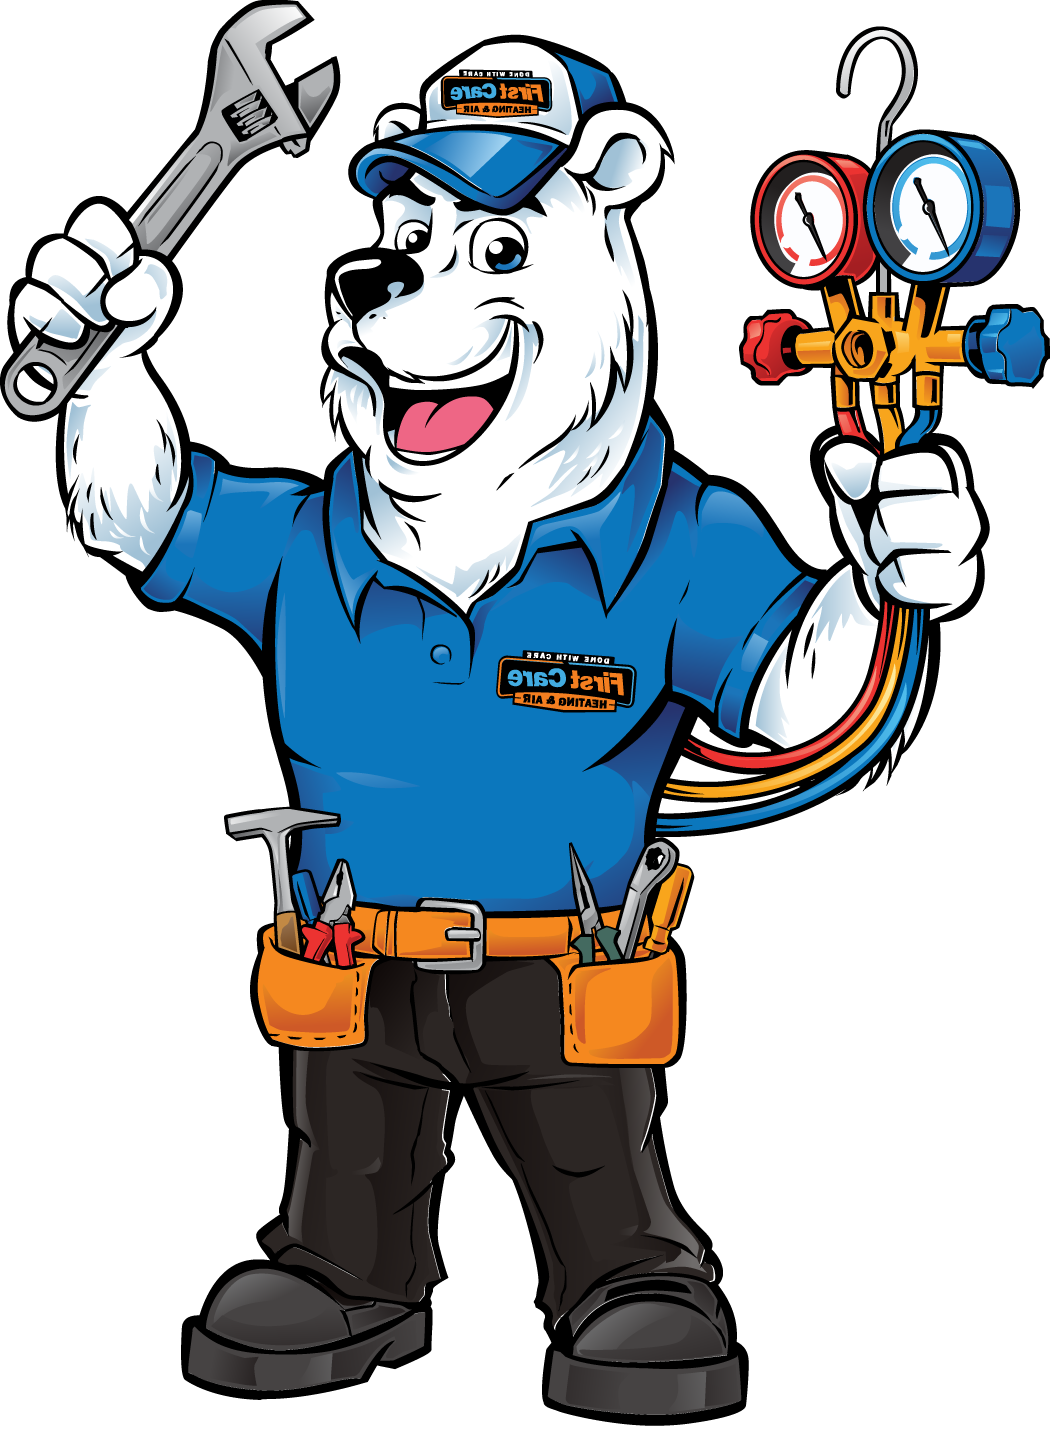 Call for reliable Heating replacement in Naperville IL.